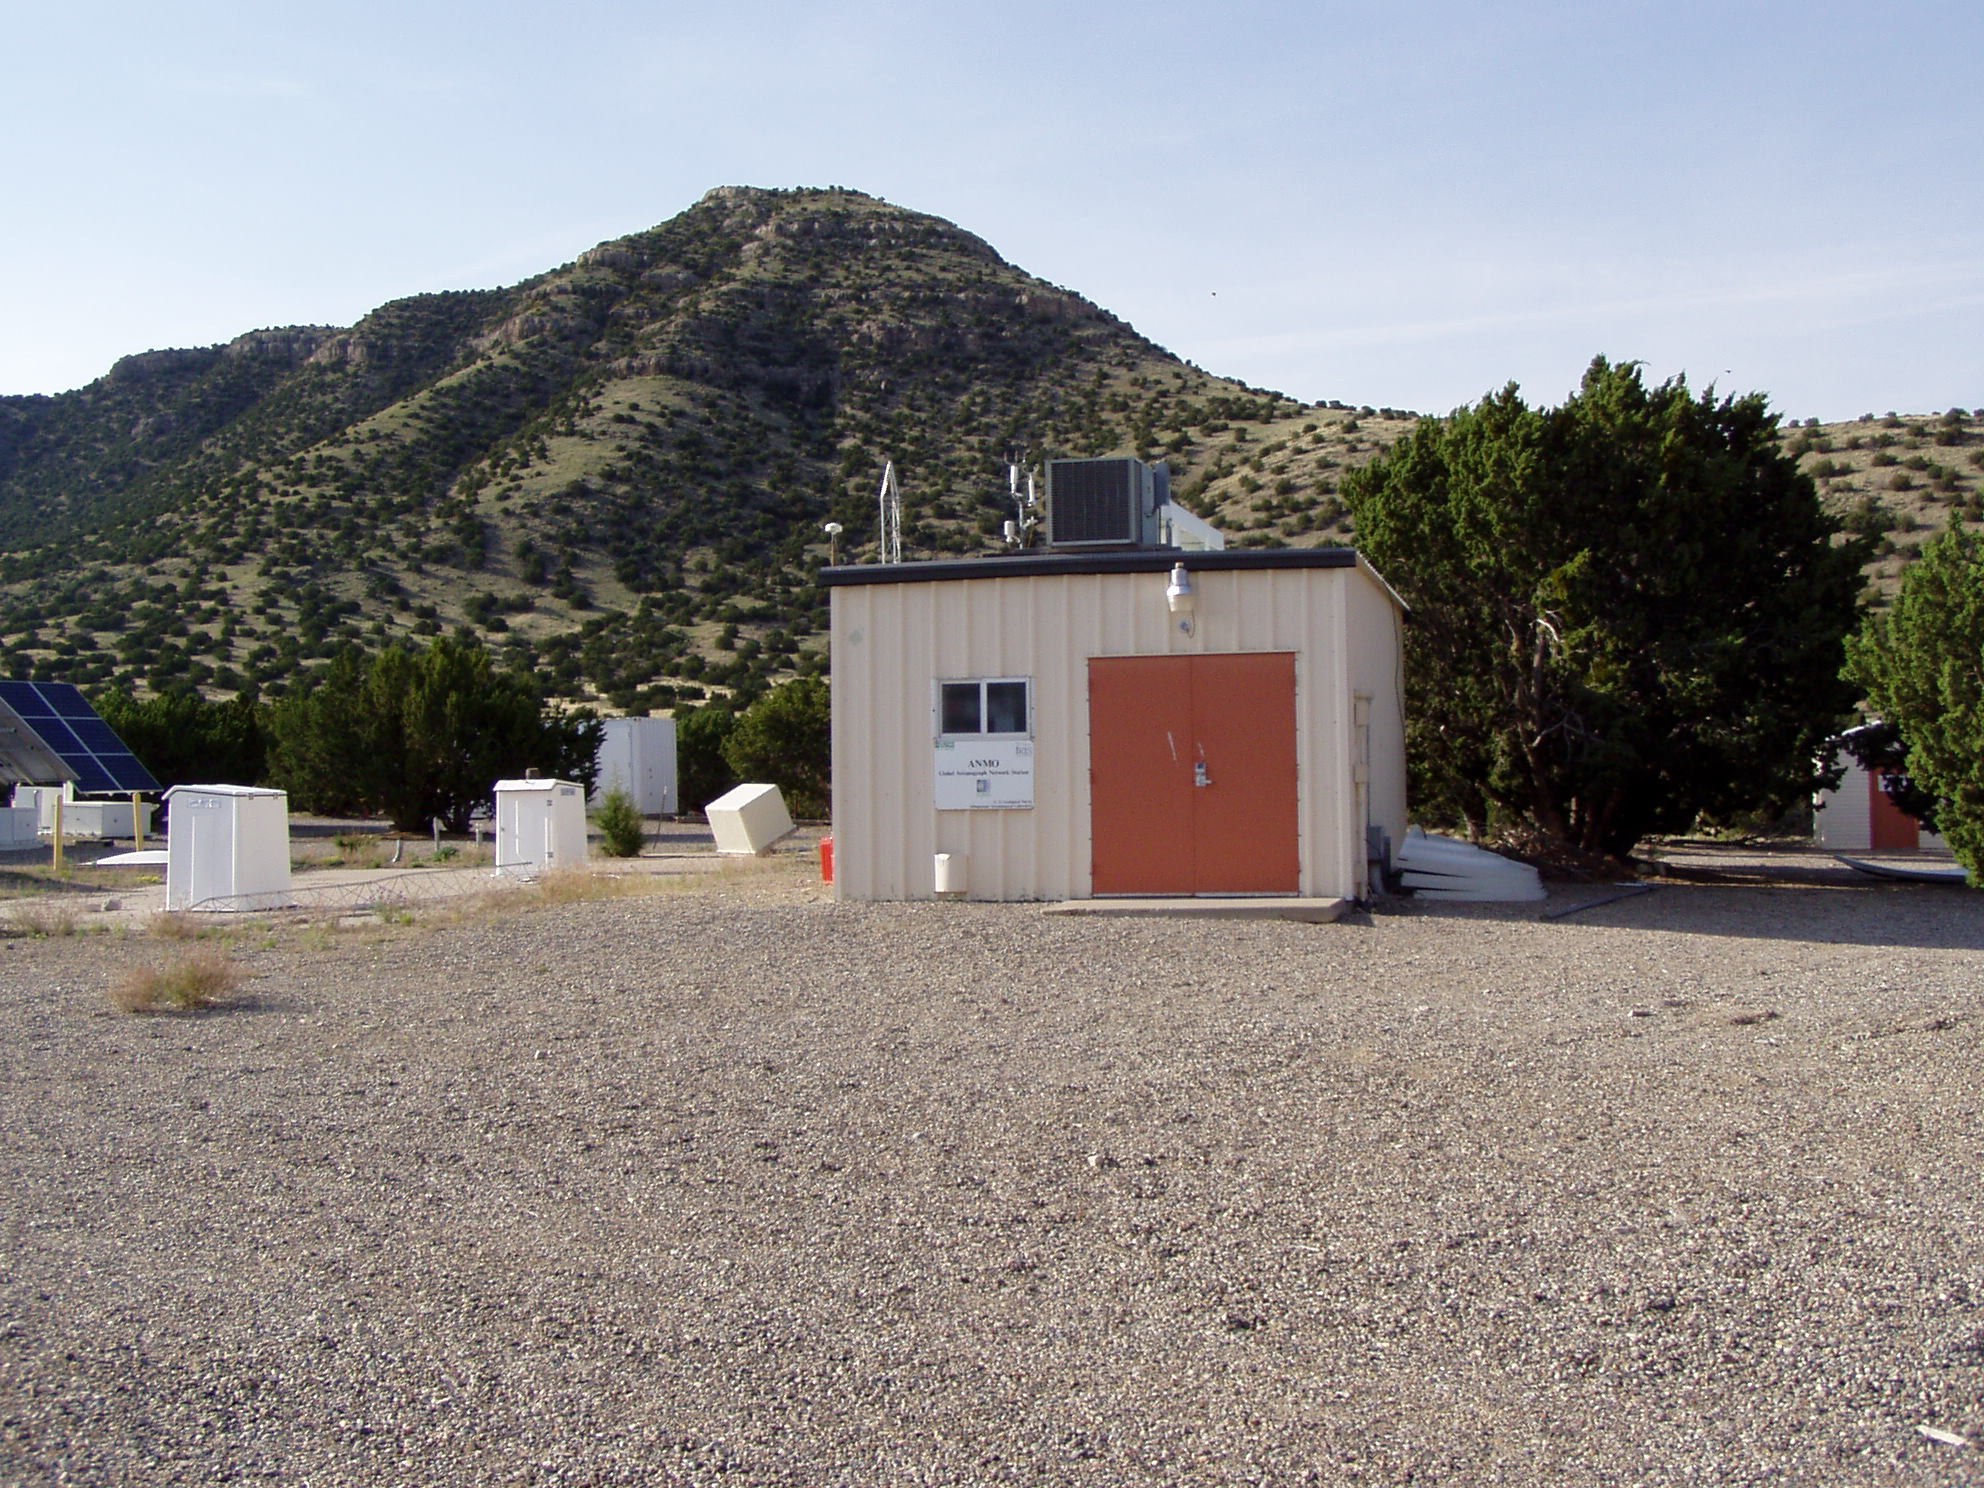 A small tan building with white boxes to its left outside in the sun. A green mountain is displayed behind it.